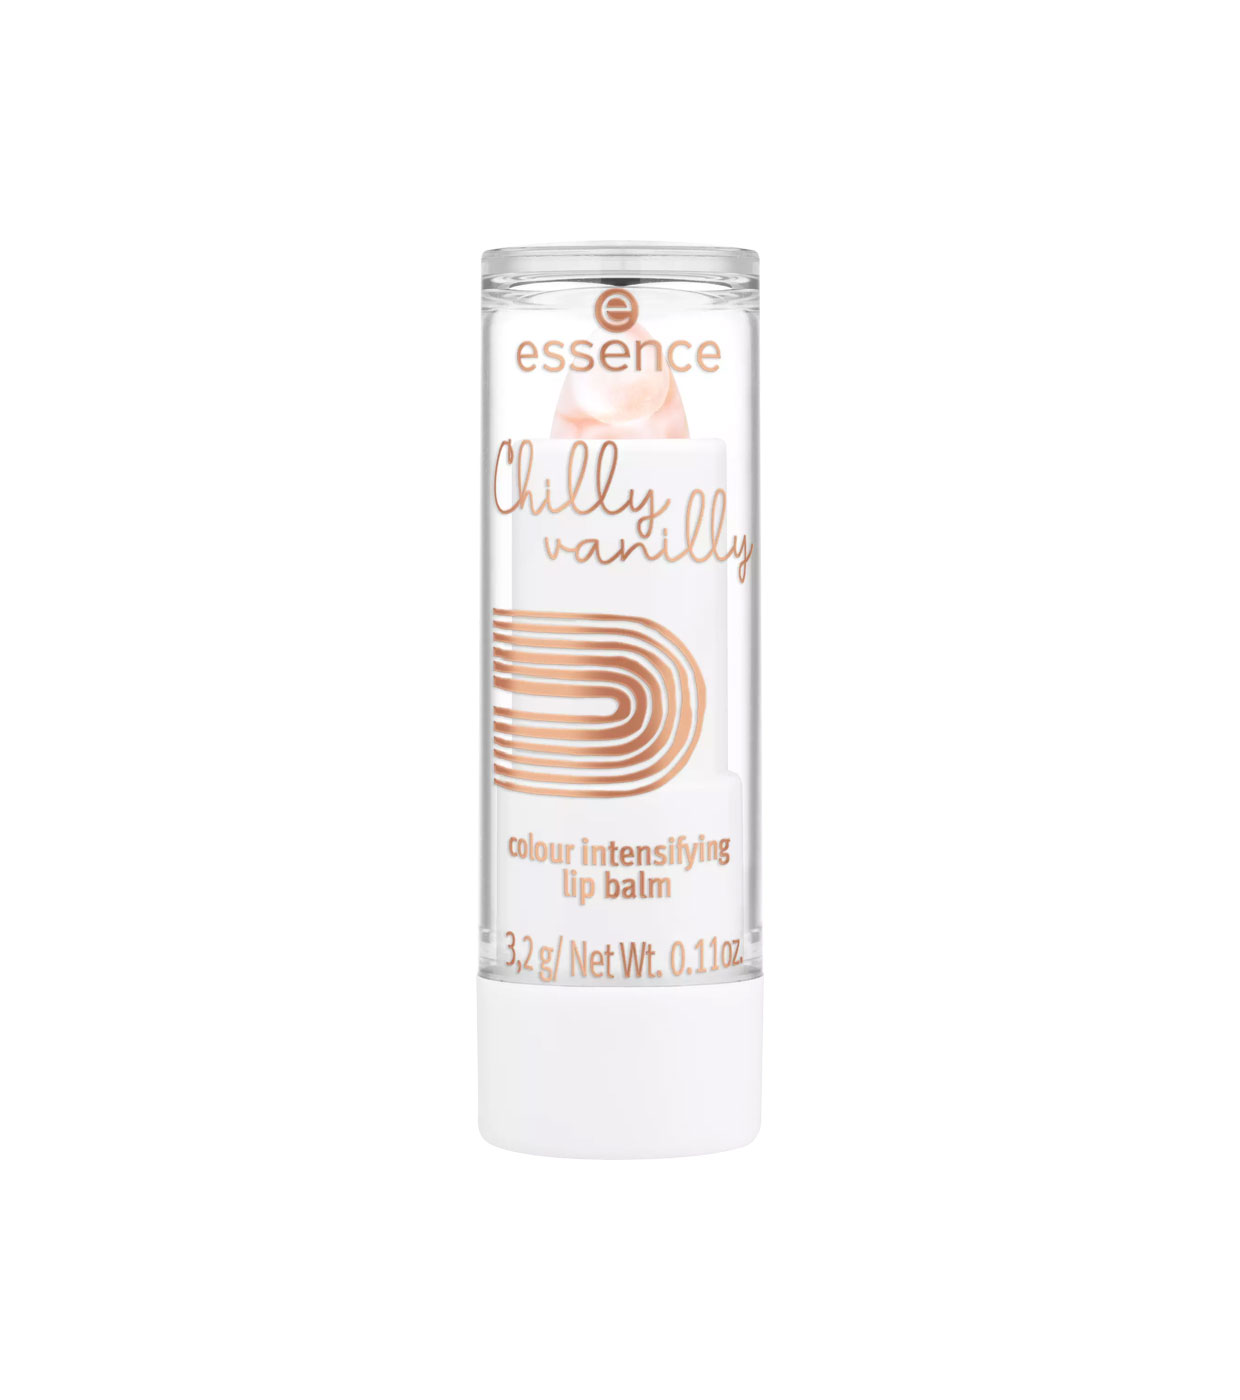 Buy essence - *Chilly Vanilly* - Tone-intensifying lip balm